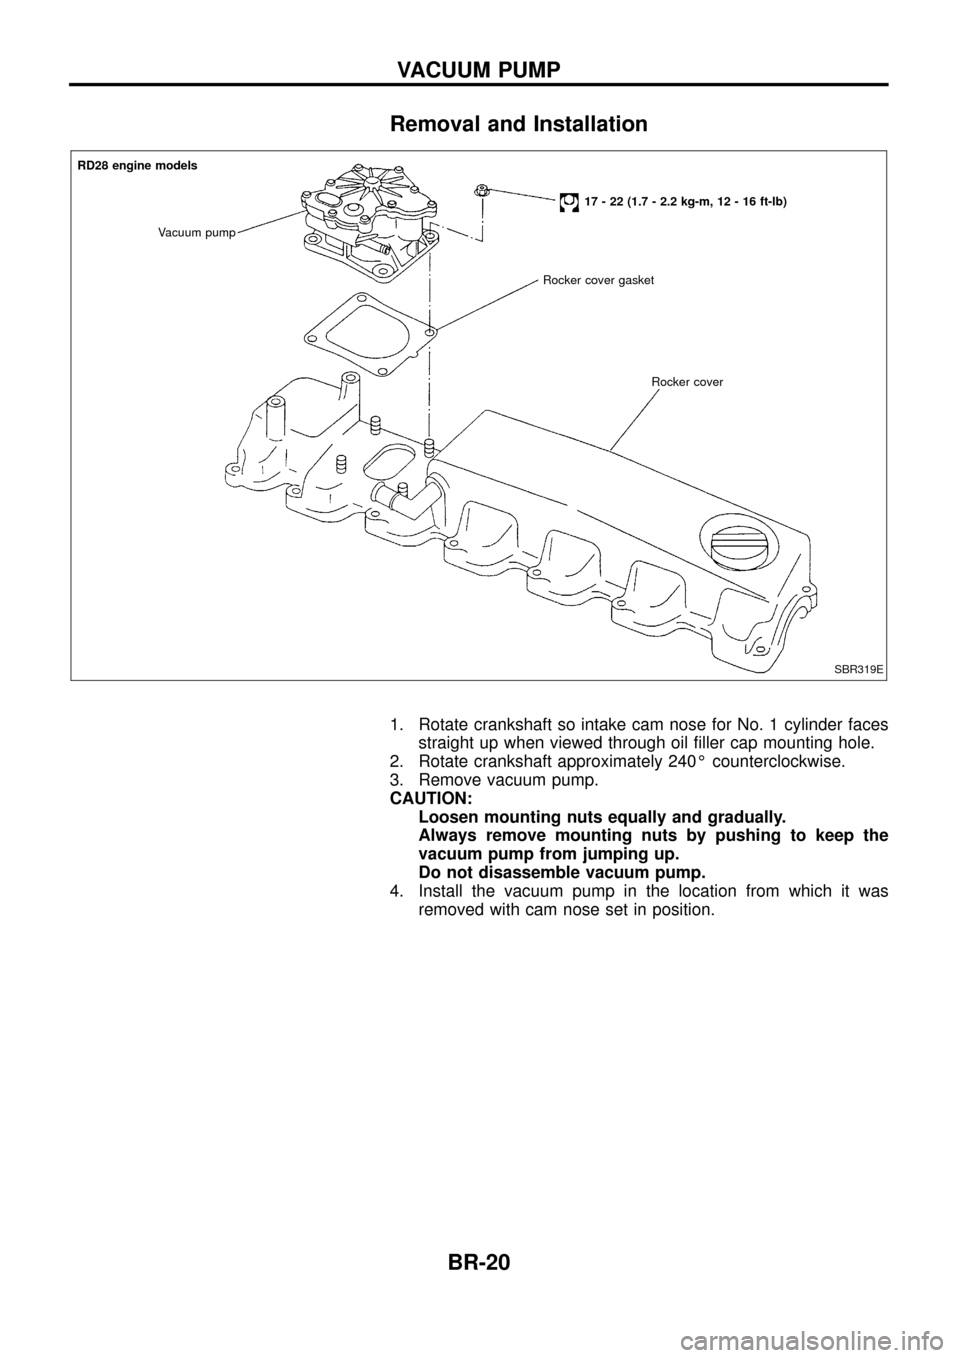 NISSAN PATROL 1998 Y61 / 5.G Brake System Owners Manual Removal and Installation
1. Rotate crankshaft so intake cam nose for No. 1 cylinder facesstraight up when viewed through oil ®ller cap mounting hole.
2. Rotate crankshaft approximately 240É counterc